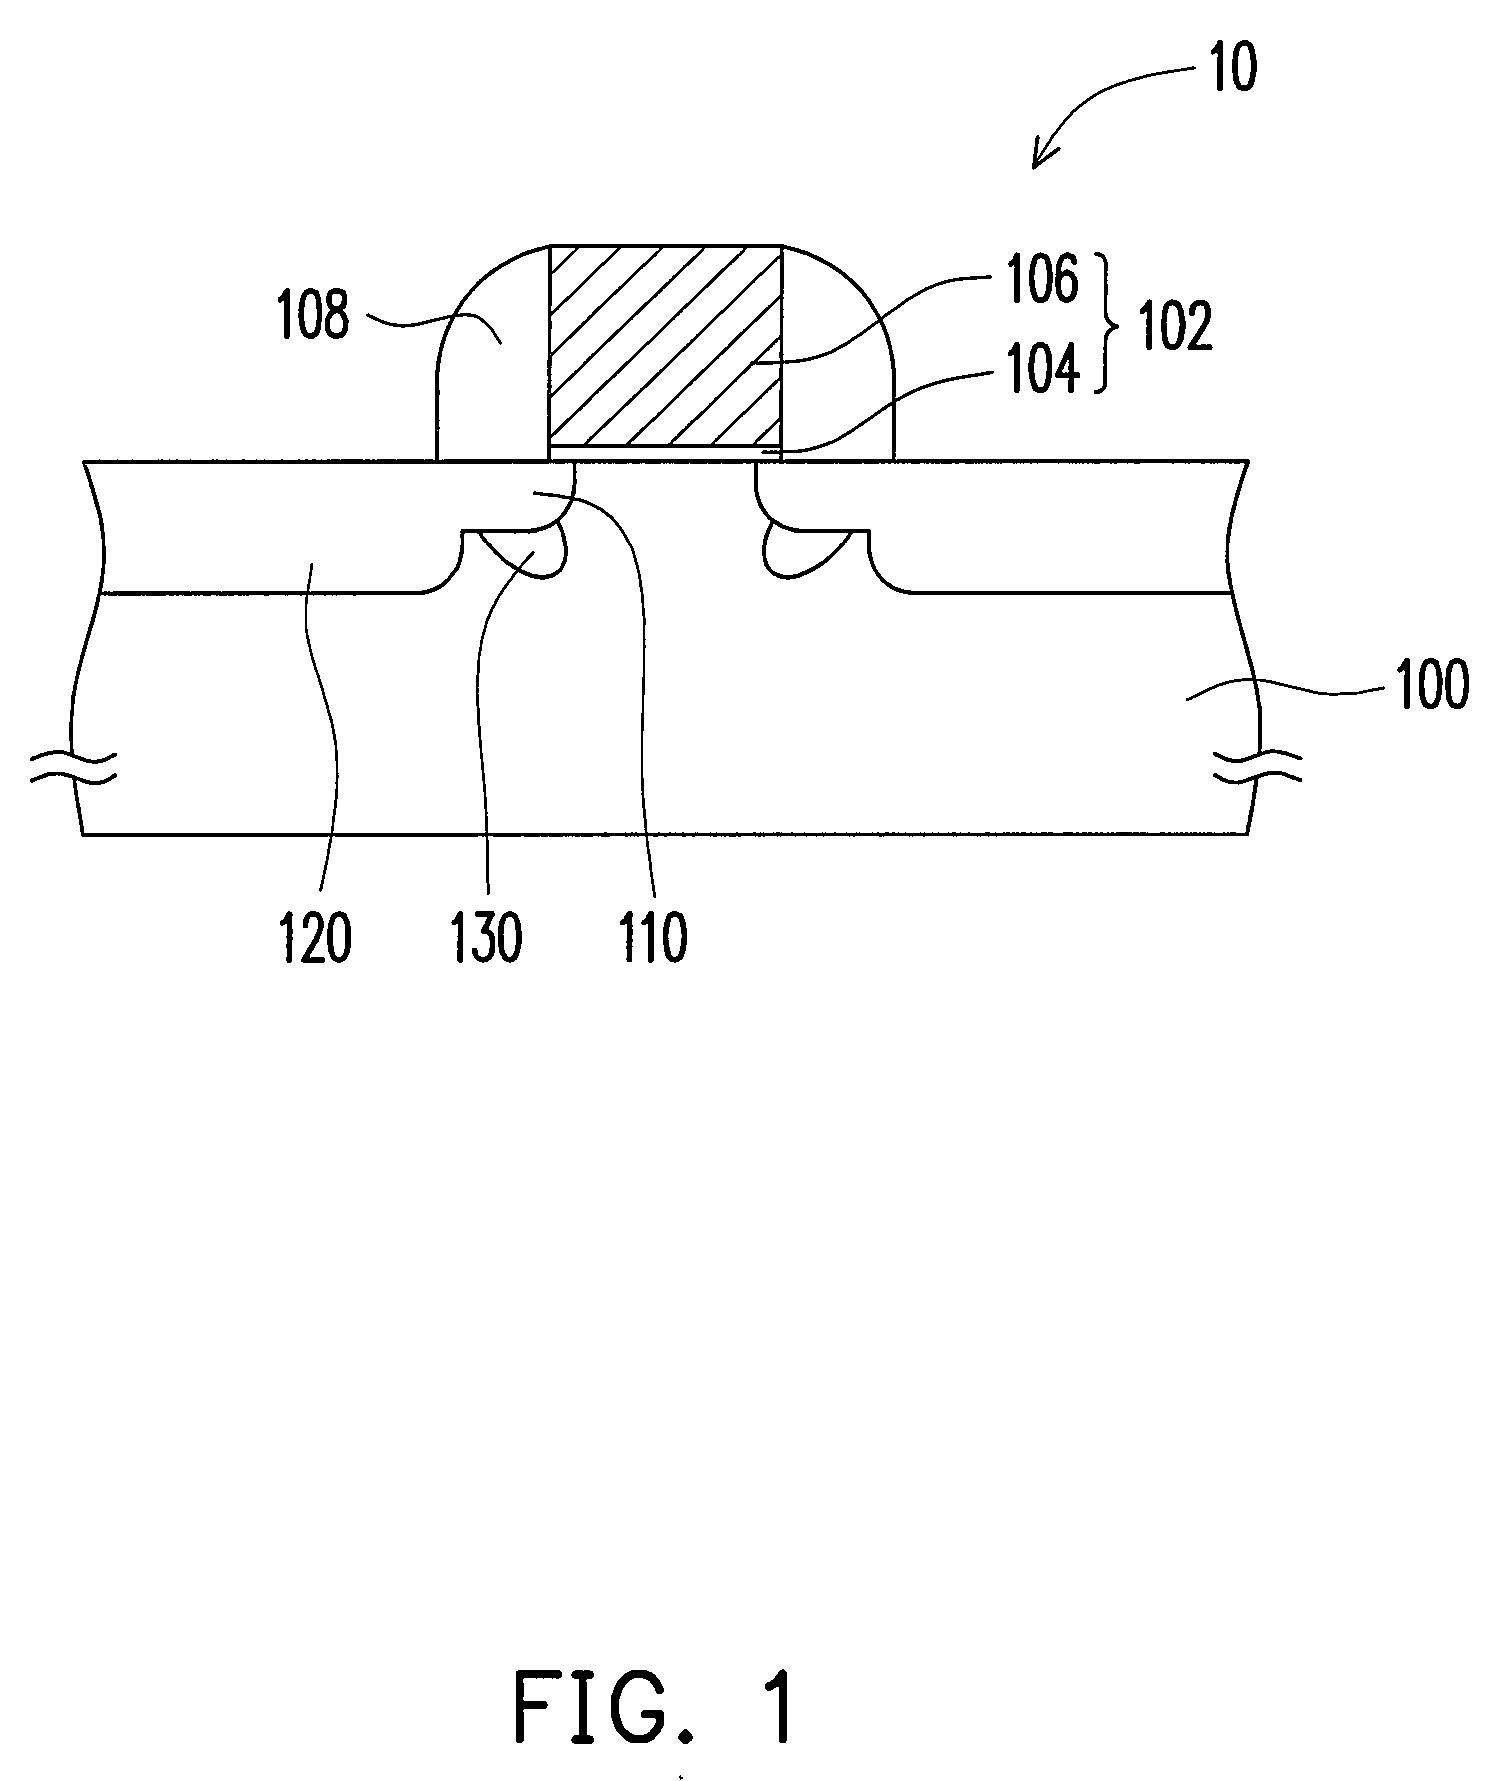 Method for fabricating P-channel field-effect transistor (FET)